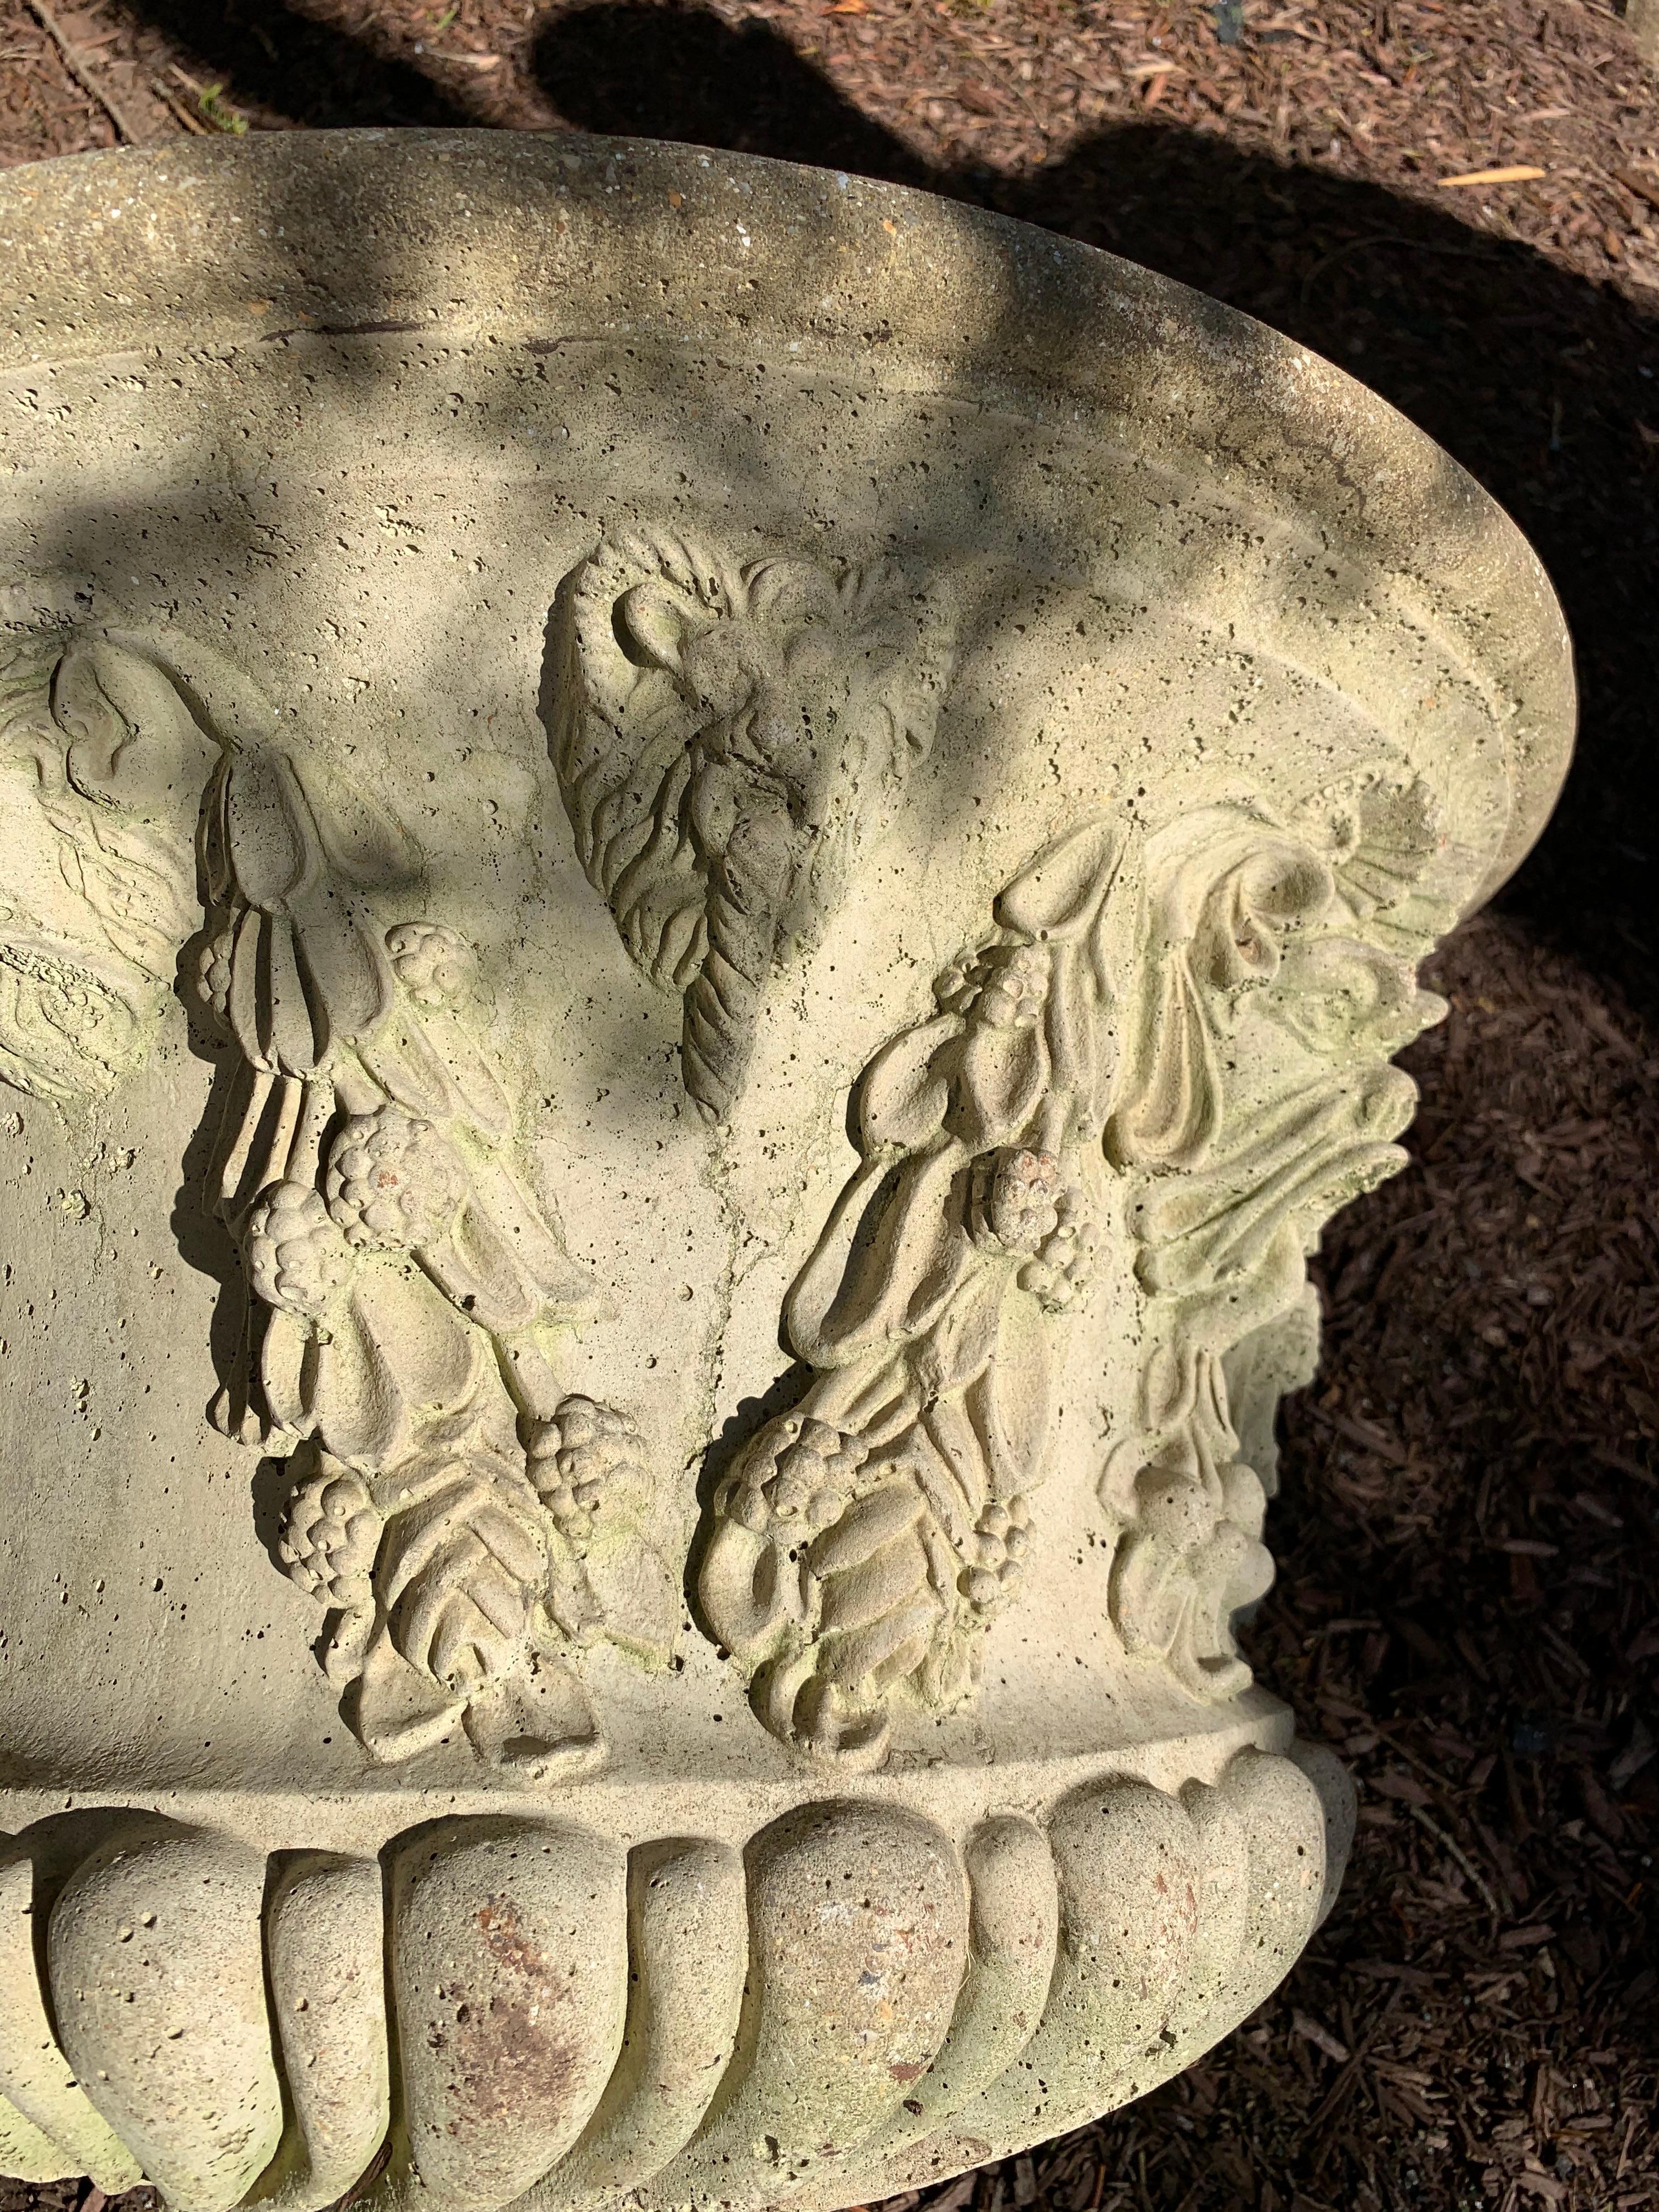 Beautiful vintage stone planters urns having ornate floral relief decoration.
   